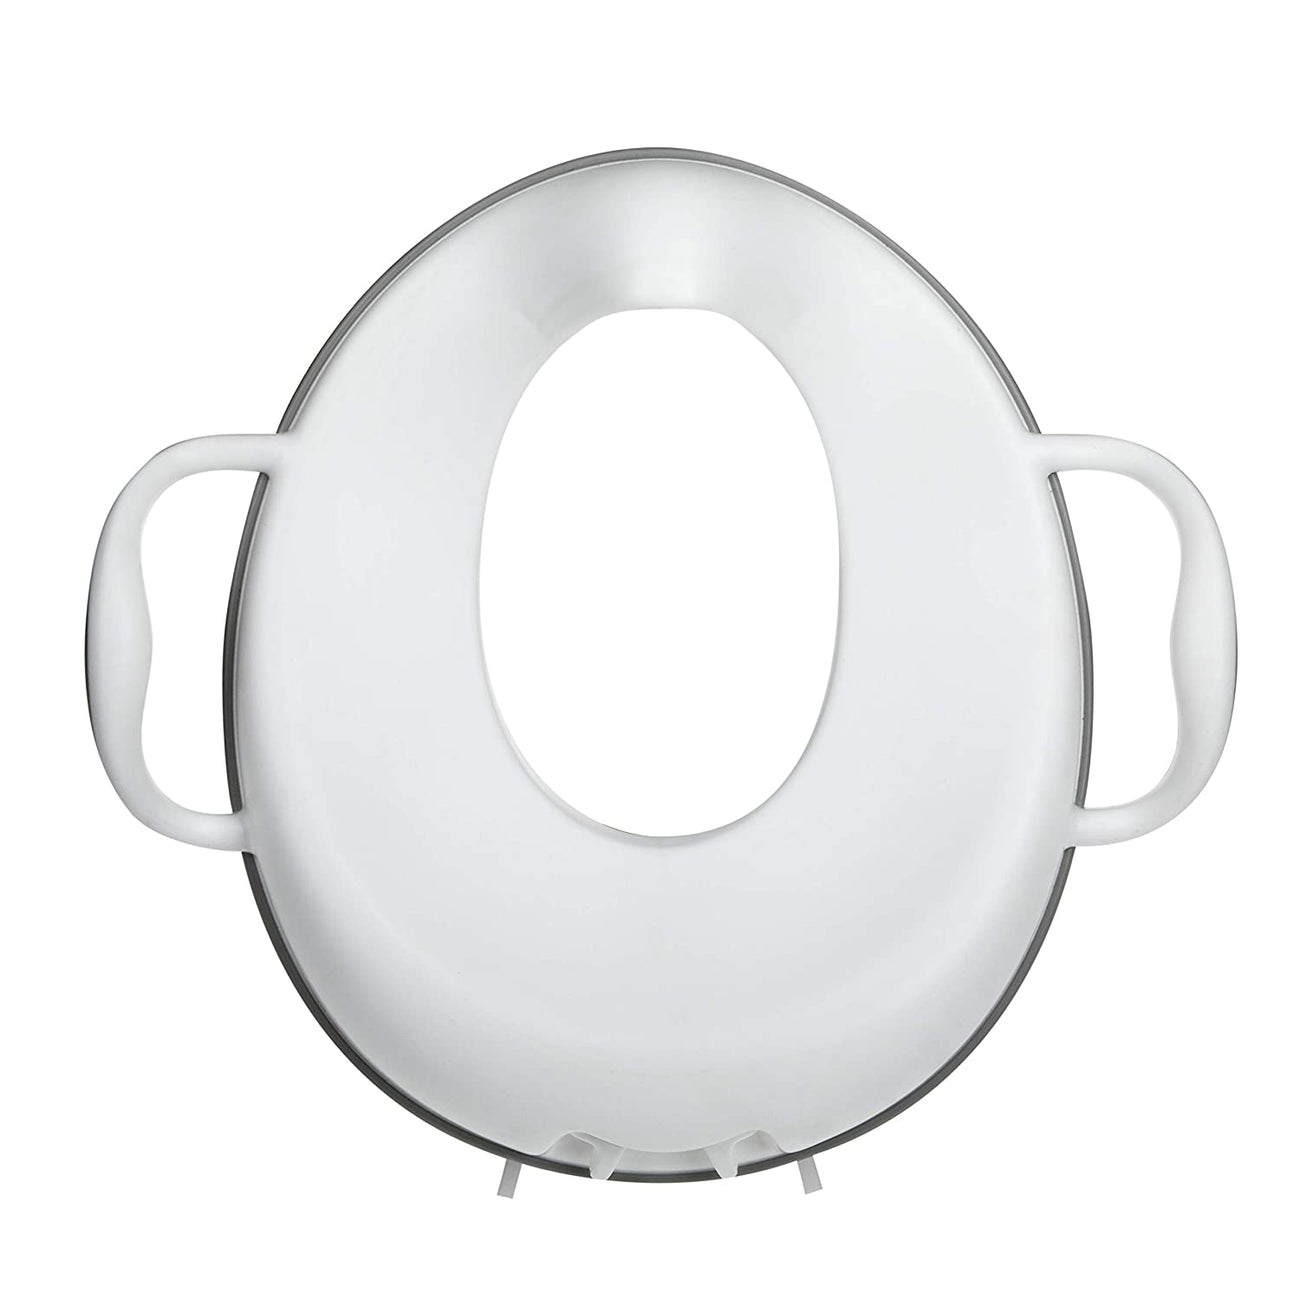 Safety Toilet Seat Trainer - Nuby US